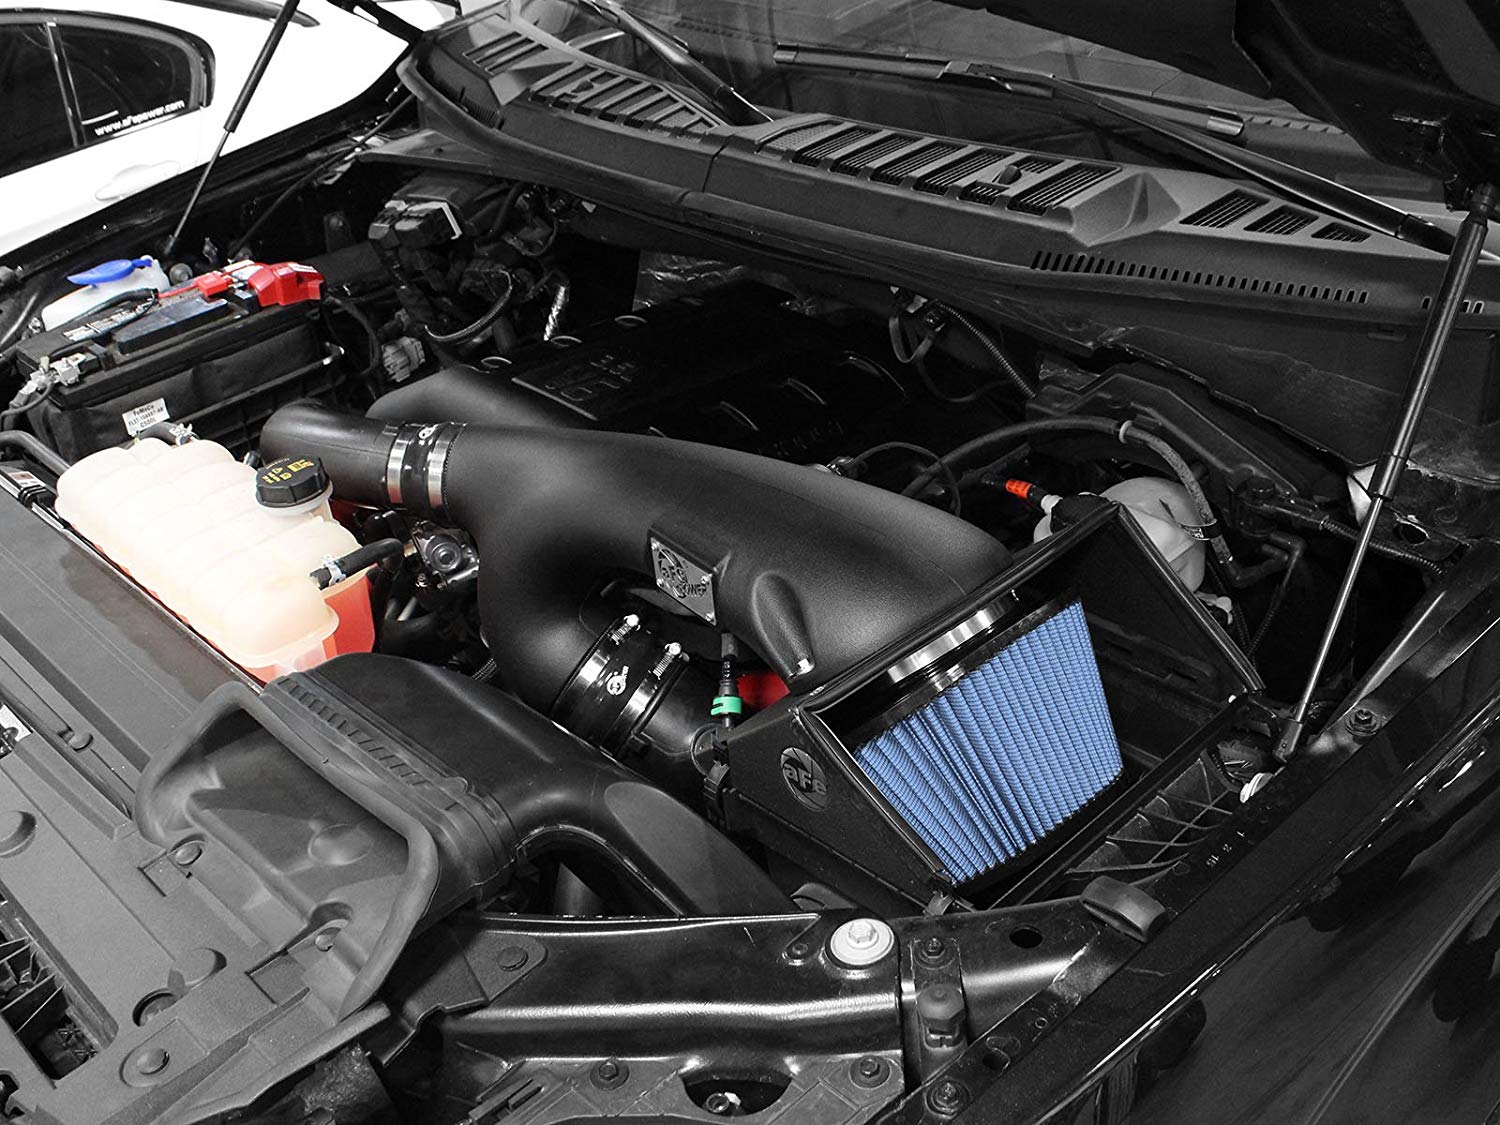 Best Cold Air Intake for F150 Ecoboost